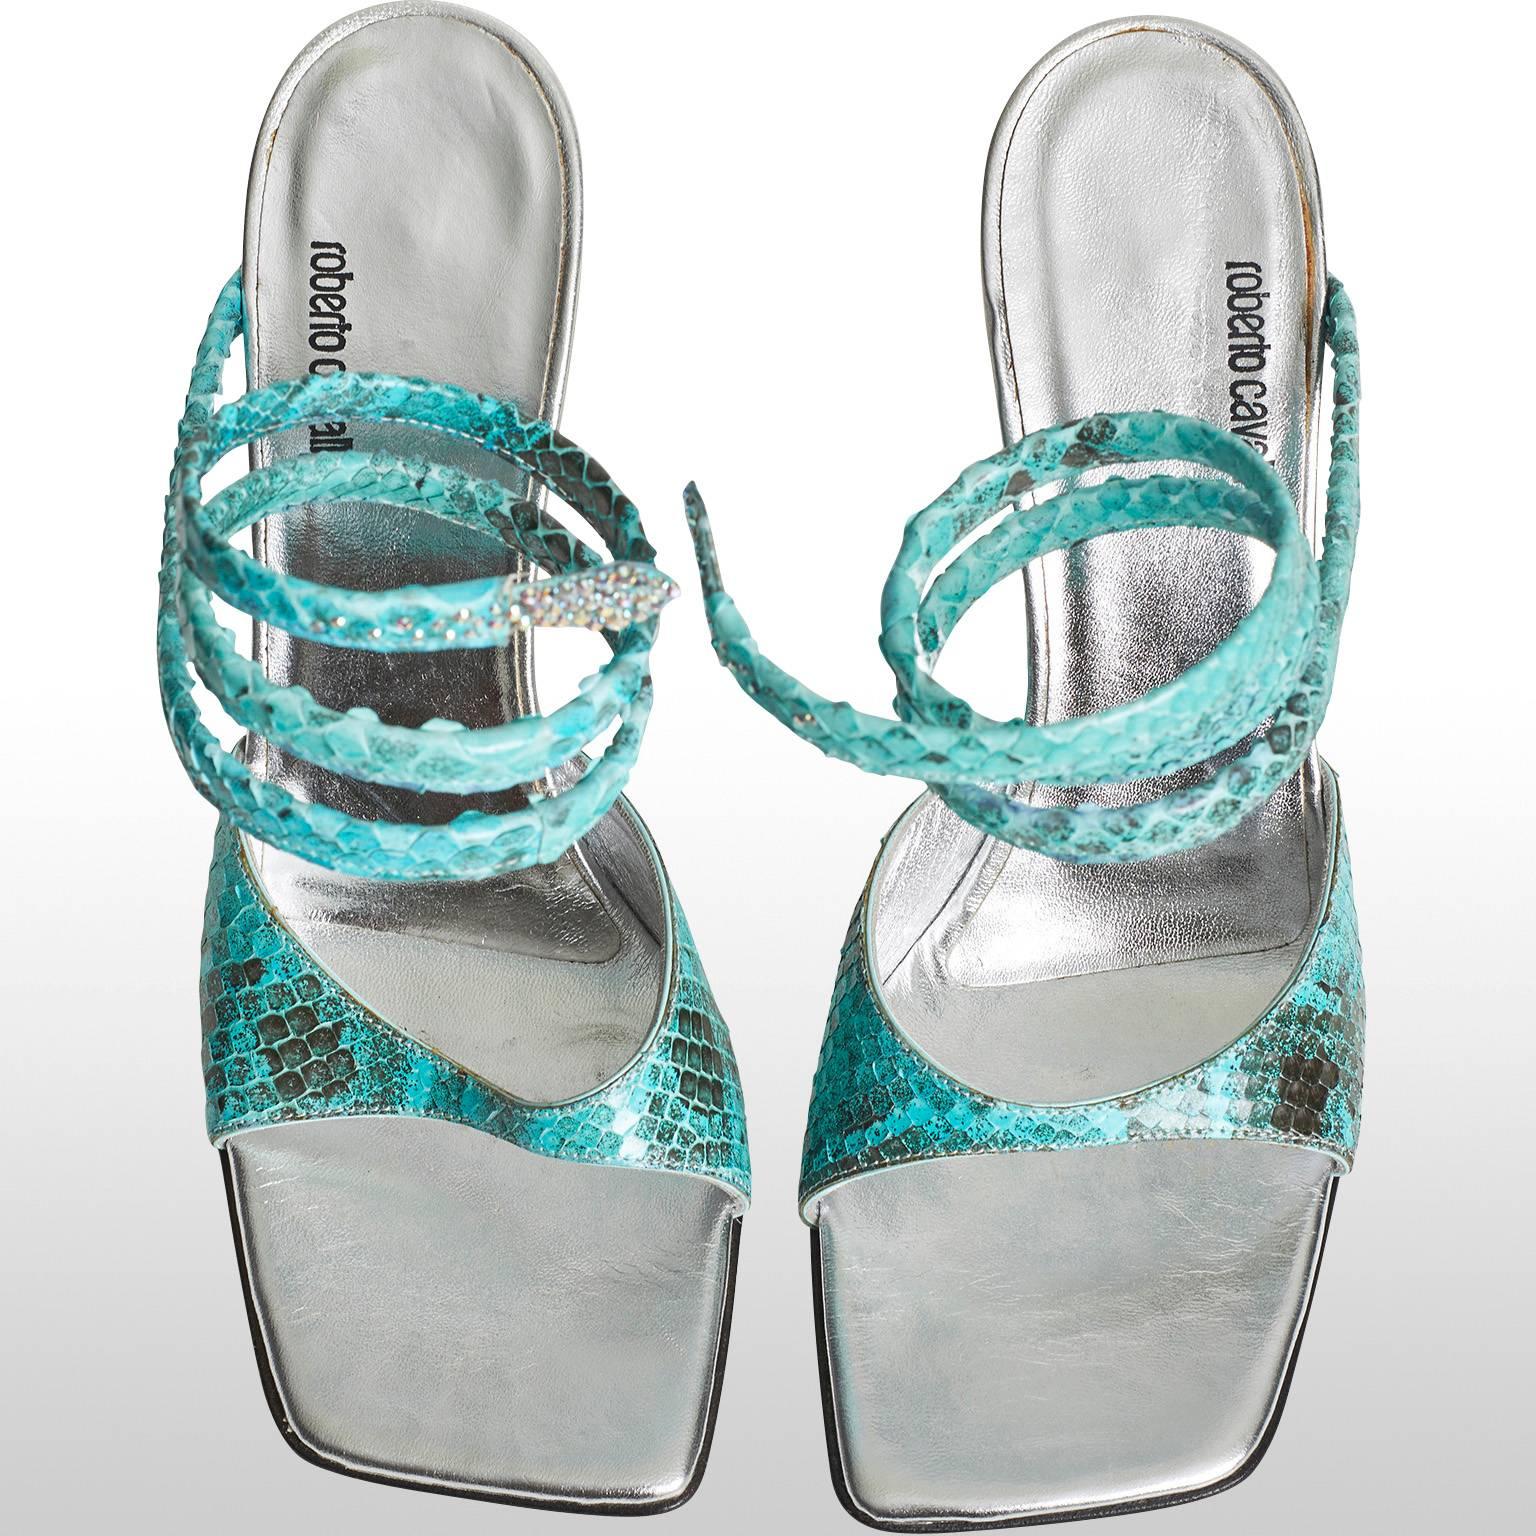 Roberto Cavalli Turquoise Snakeskin Silver Sandals Shoes In Good Condition For Sale In London, GB